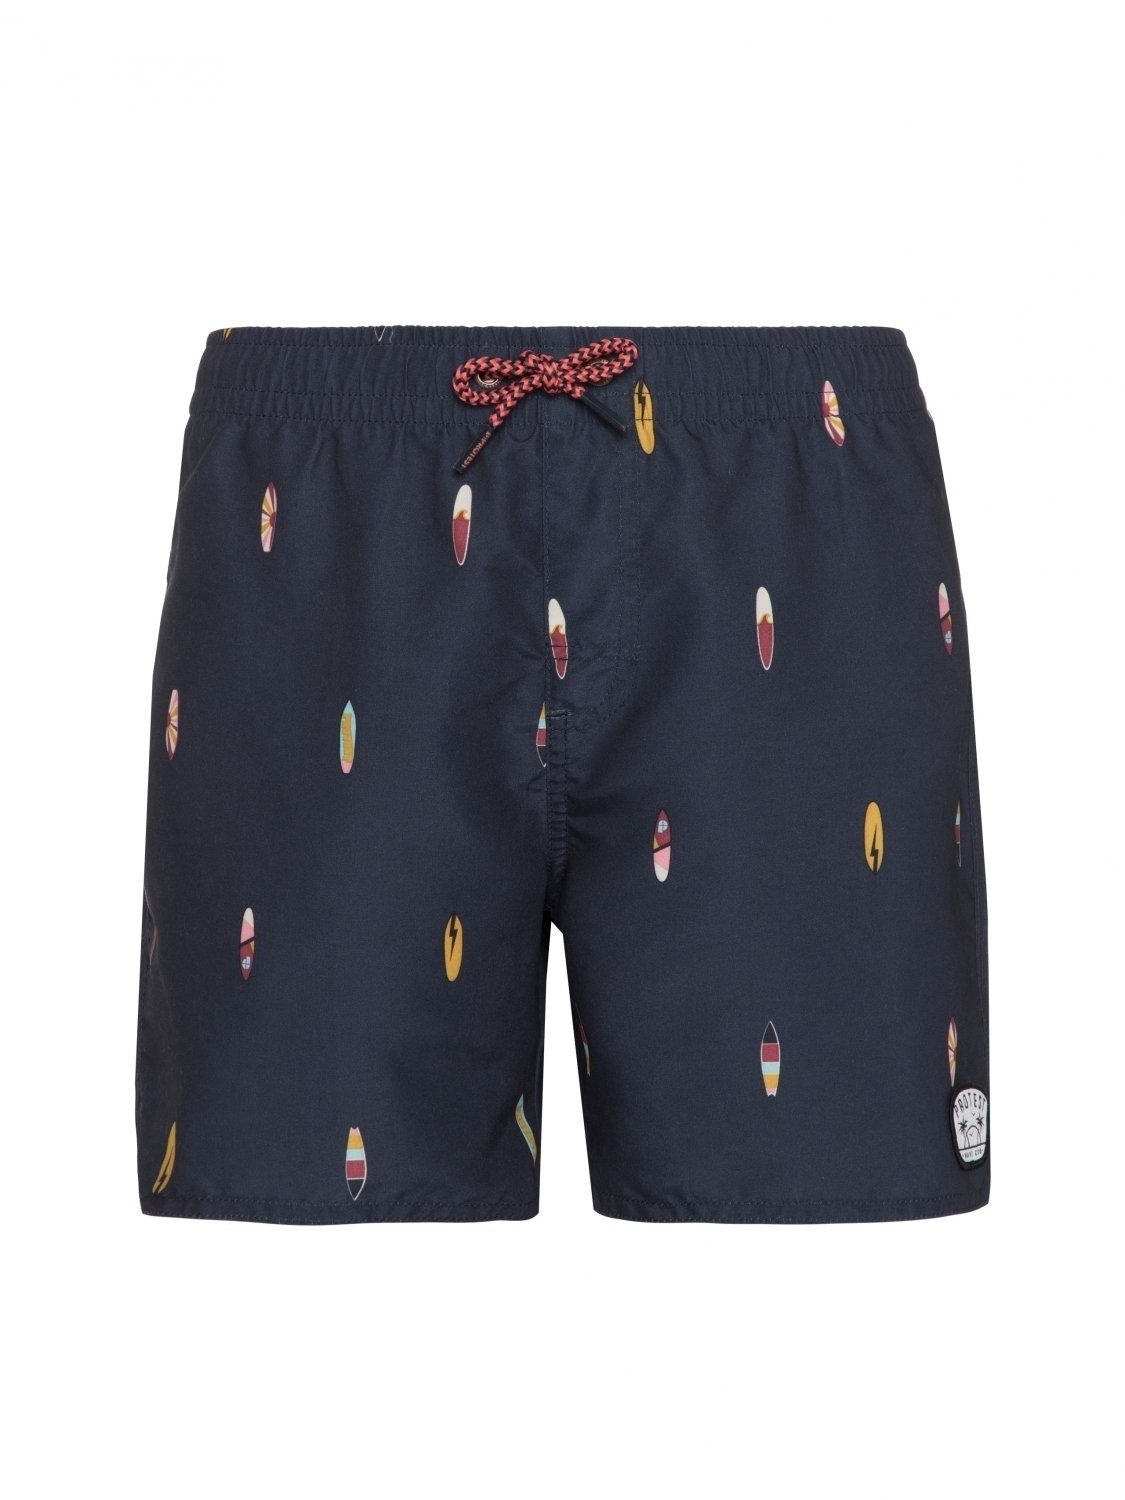 Protest Badeshorts Protest Prttyko Badehose Jungen